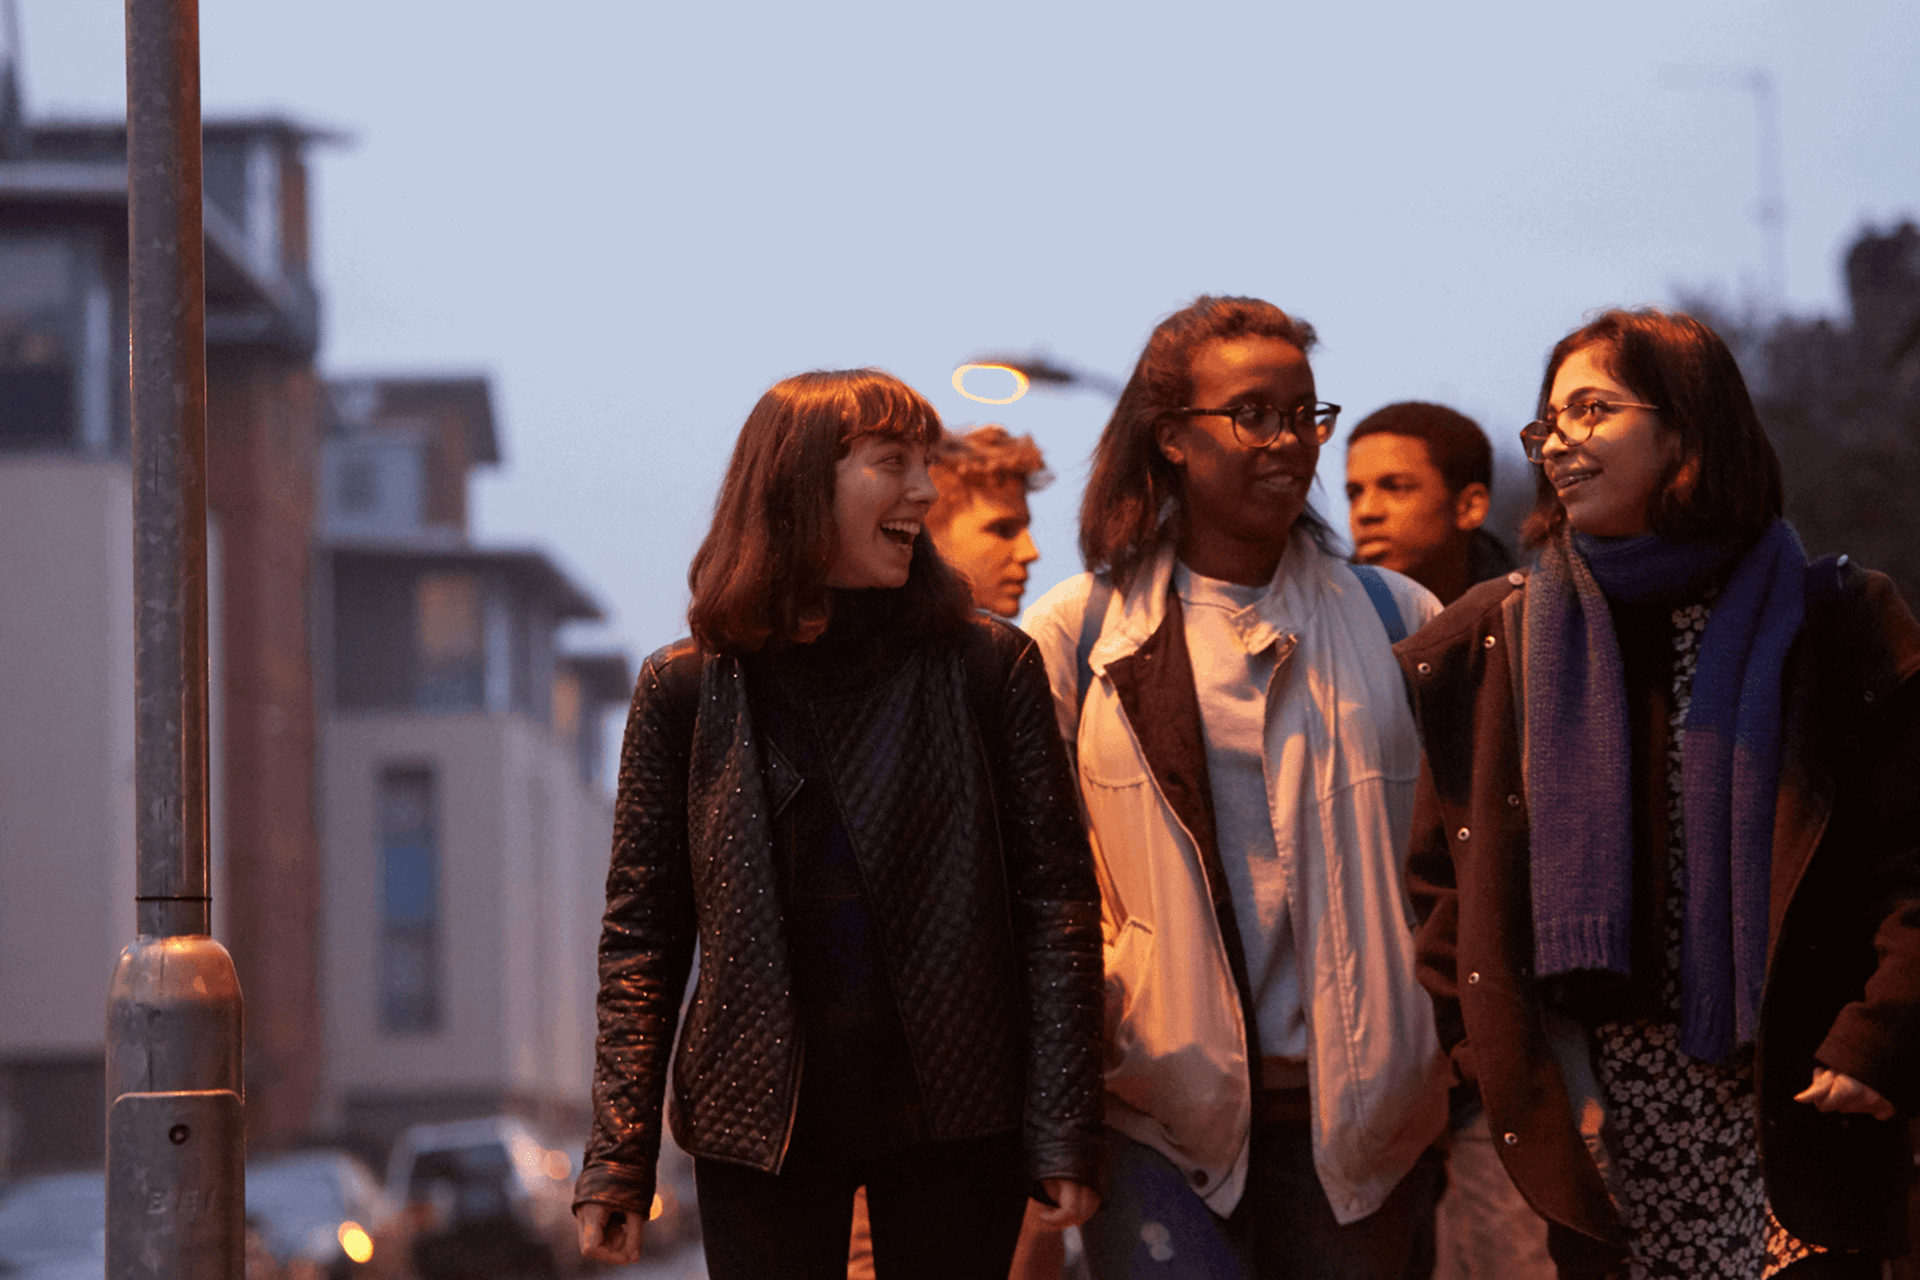 wide-shot-of-a-group-of-young-people-smiling-while-walking-on-a-street-with-houses-at-night